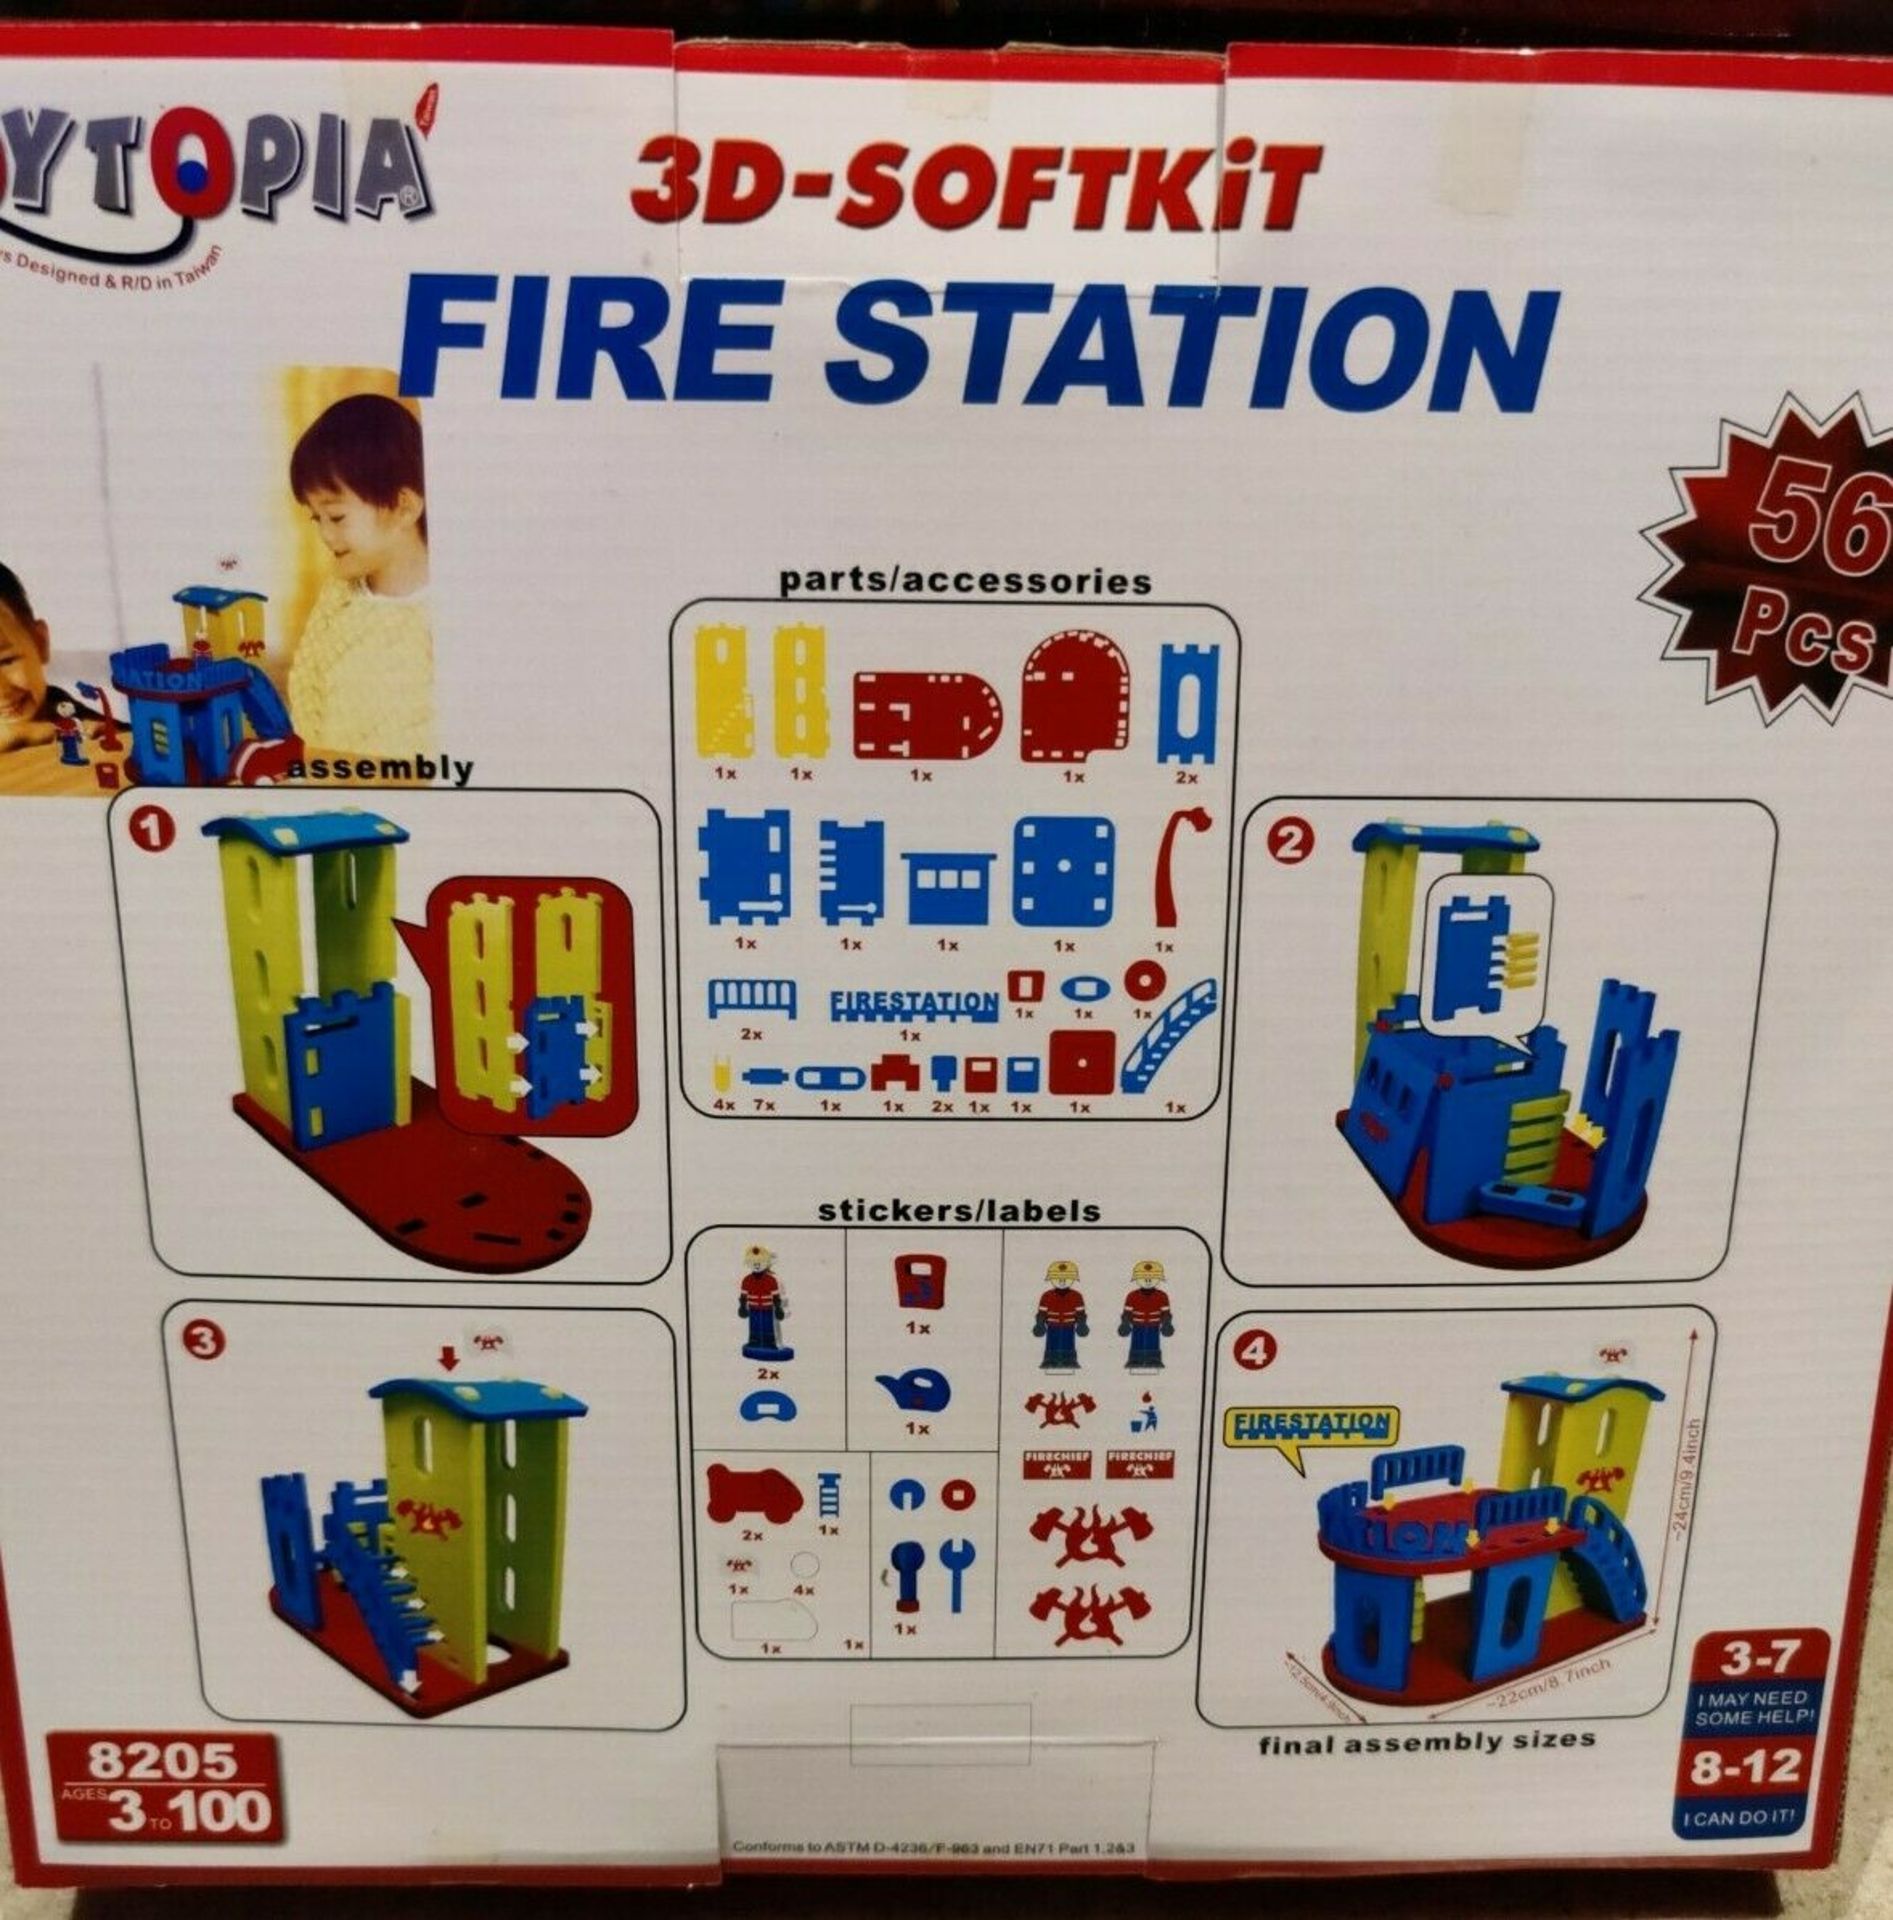 Toytopia 3D Softkit Fire Station - 56 Piece Play Set - Image 4 of 4